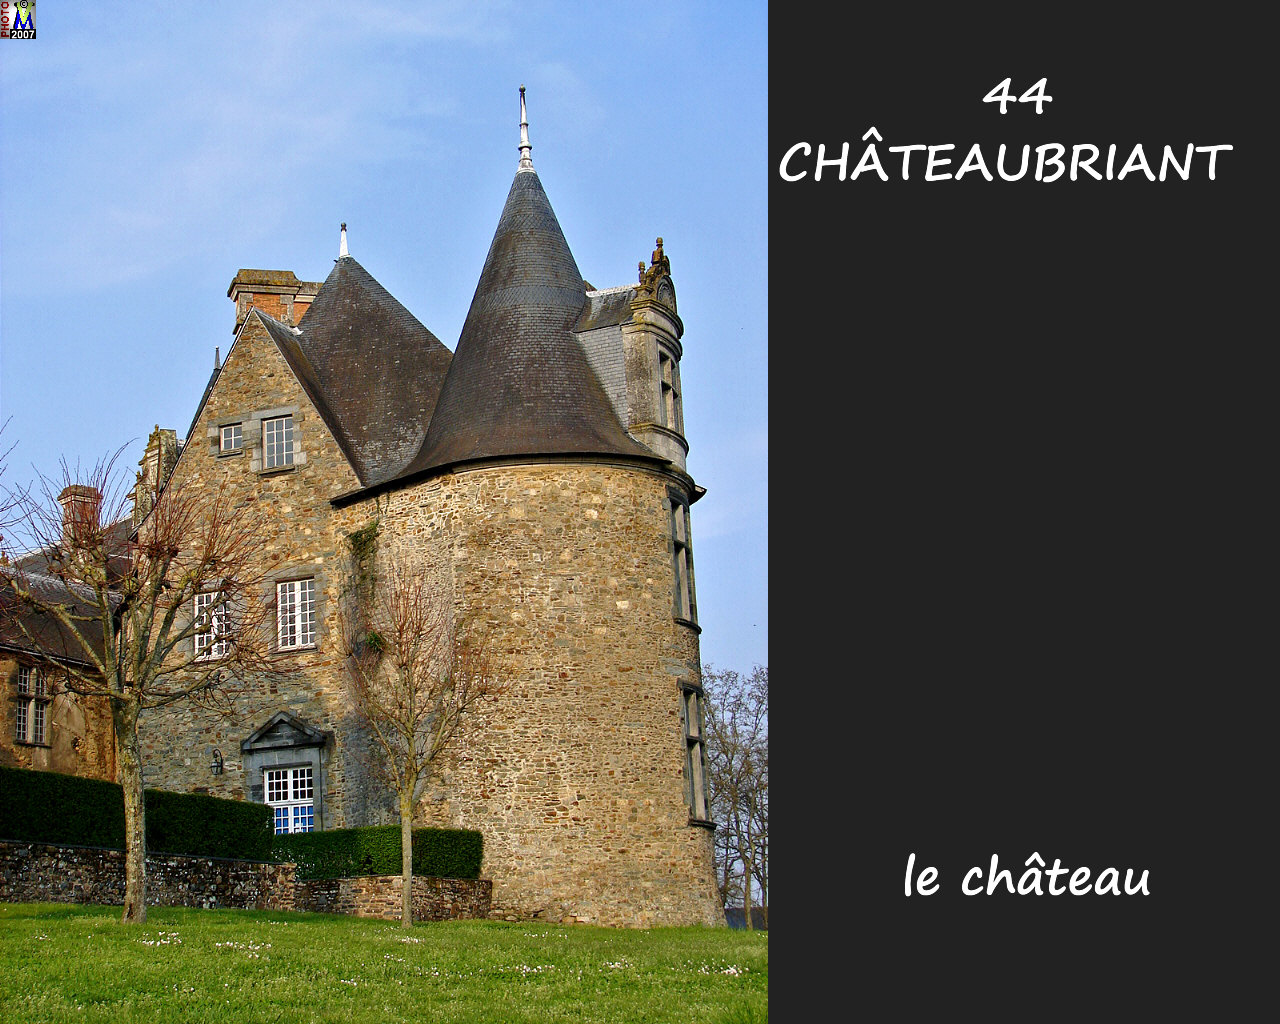 44CHATEAUBRIANT_chateau_108.jpg